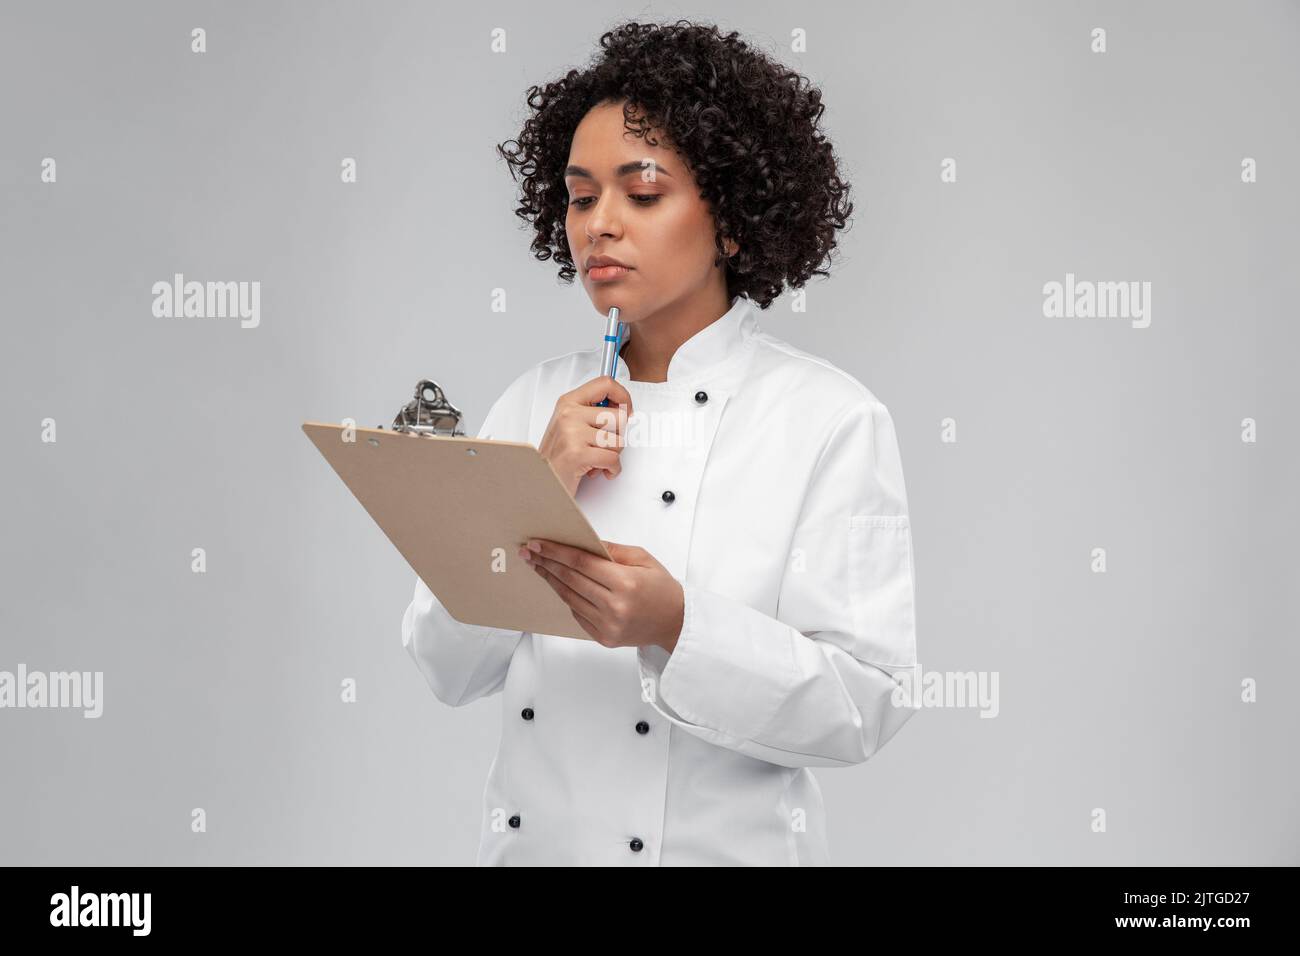 thinking female chef with clipboard and pen Stock Photo